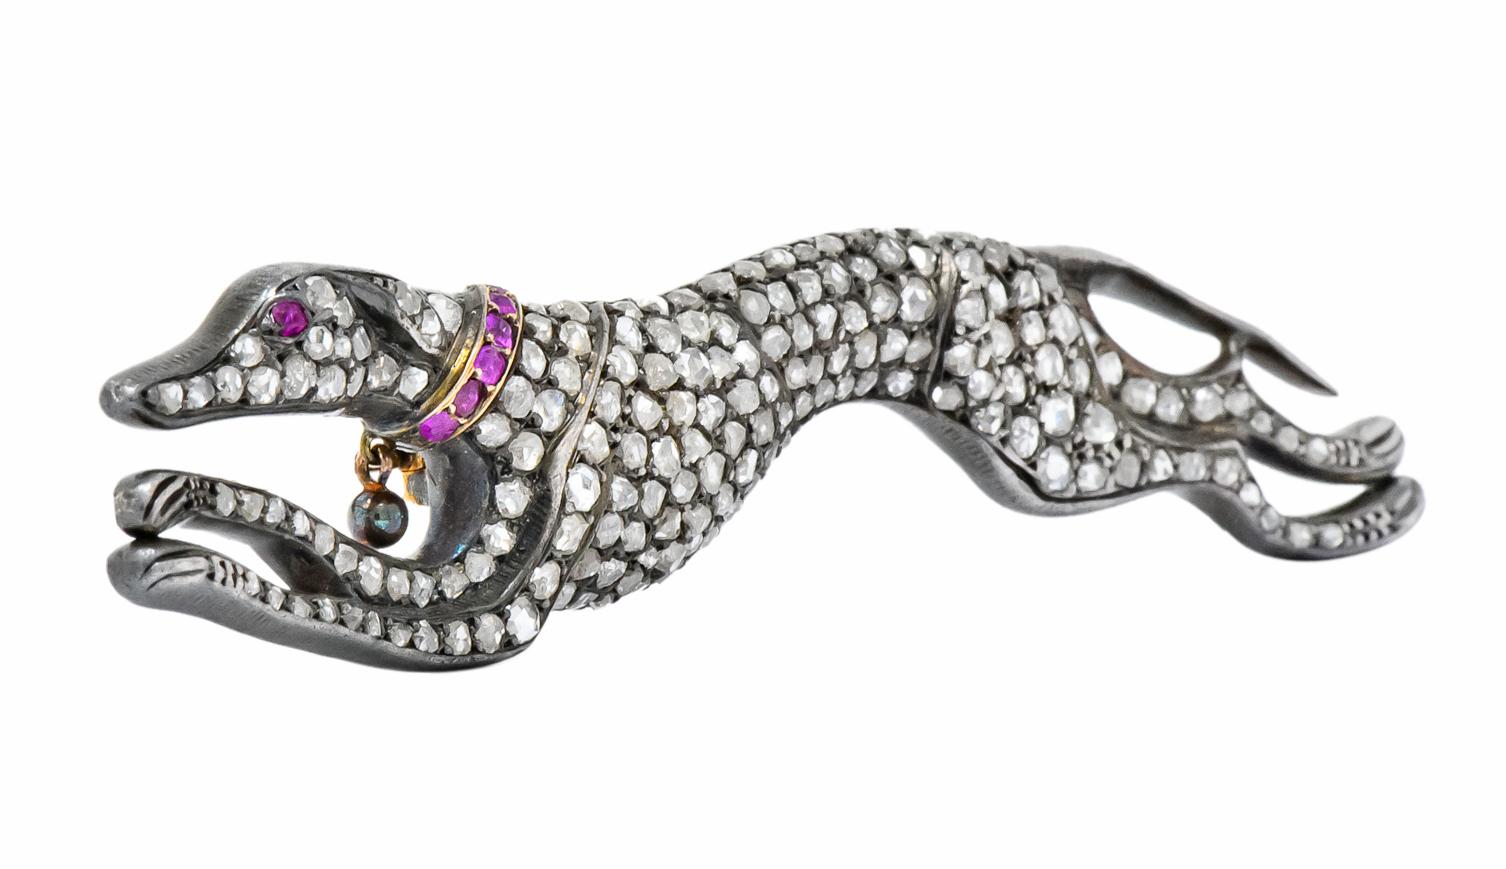 Designed as a greyhound, mid-run, set throughout with rose cut diamonds weighing approximately 3.25 carat total

Accented by rose cut and old European cut rubies on collar and eye weighing approximately 0.22 carat total, raspberry red in color

3.47